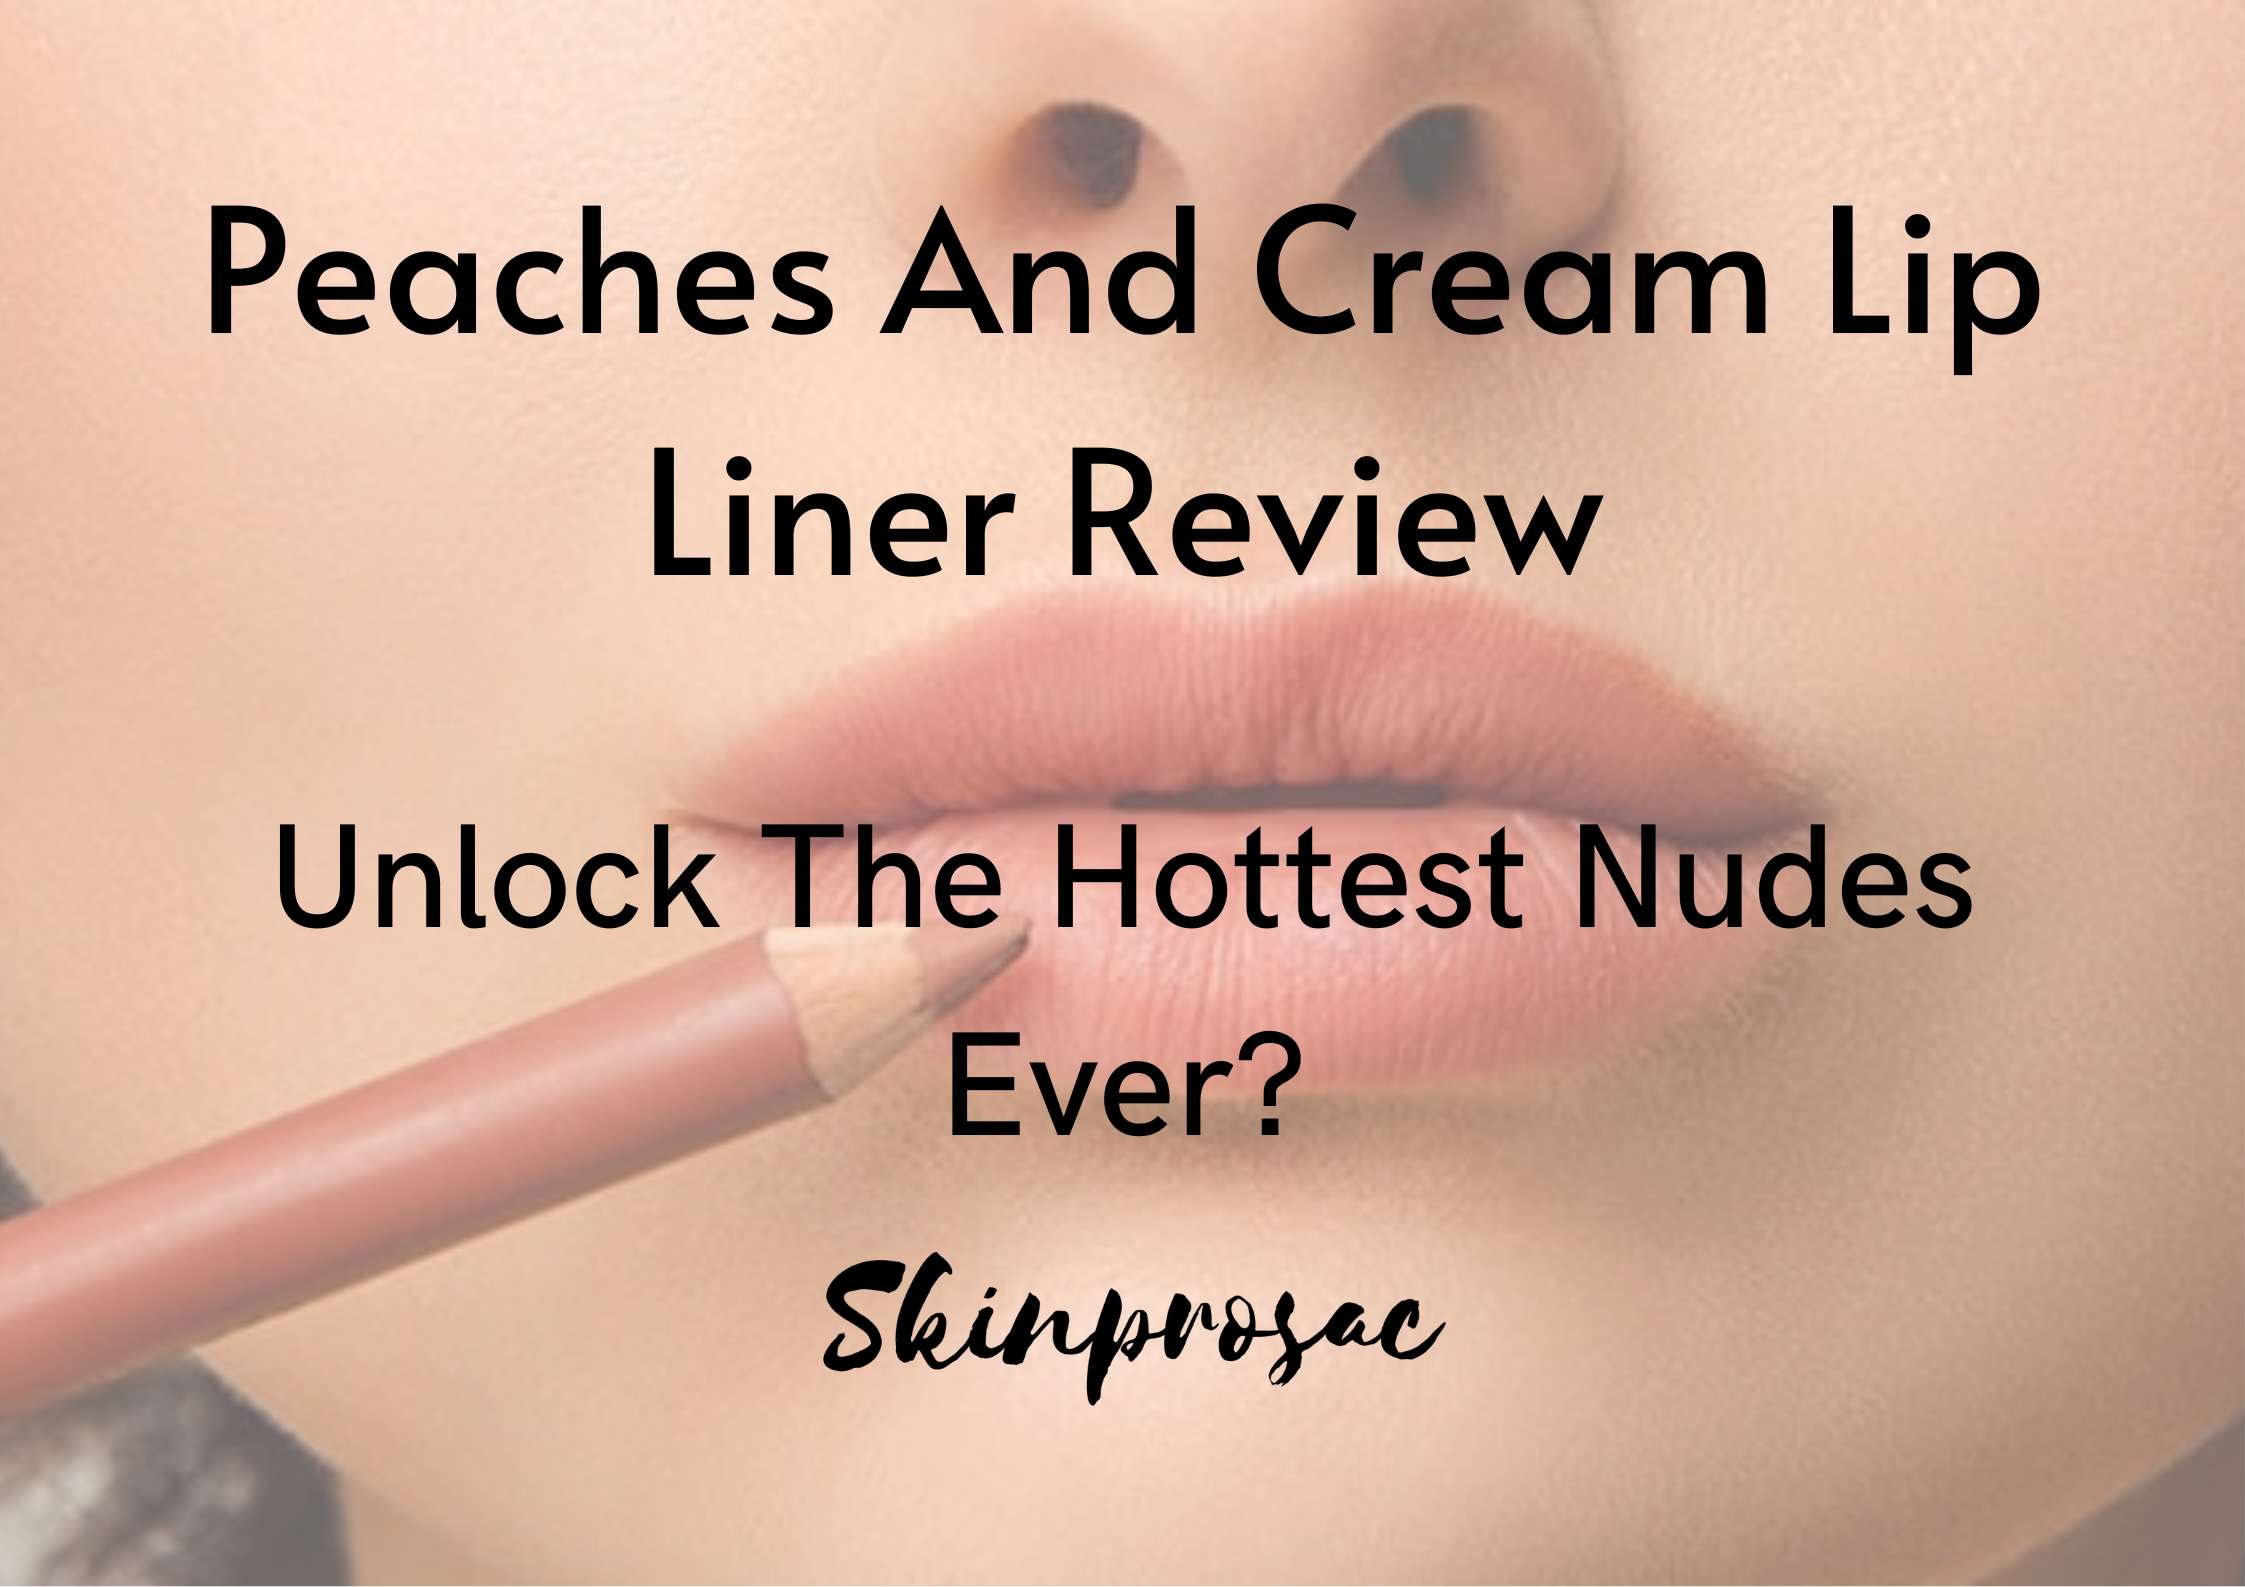 Peaches And Cream Lip Liner Review